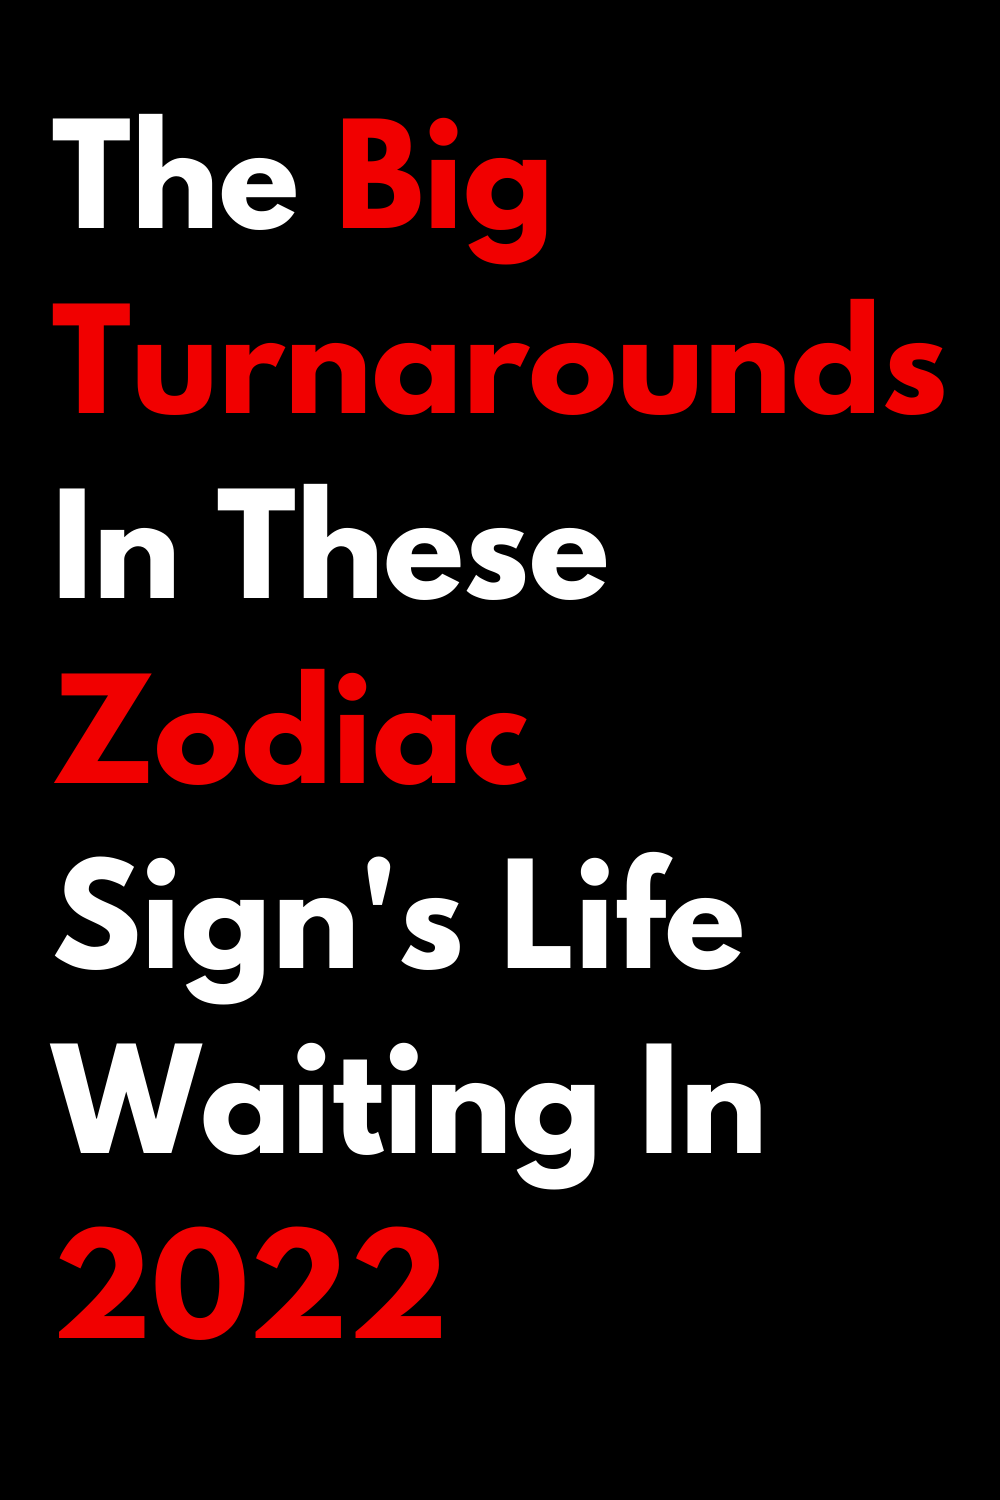 The Big Turnarounds In These Zodiac Sign's Life Waiting In 2022